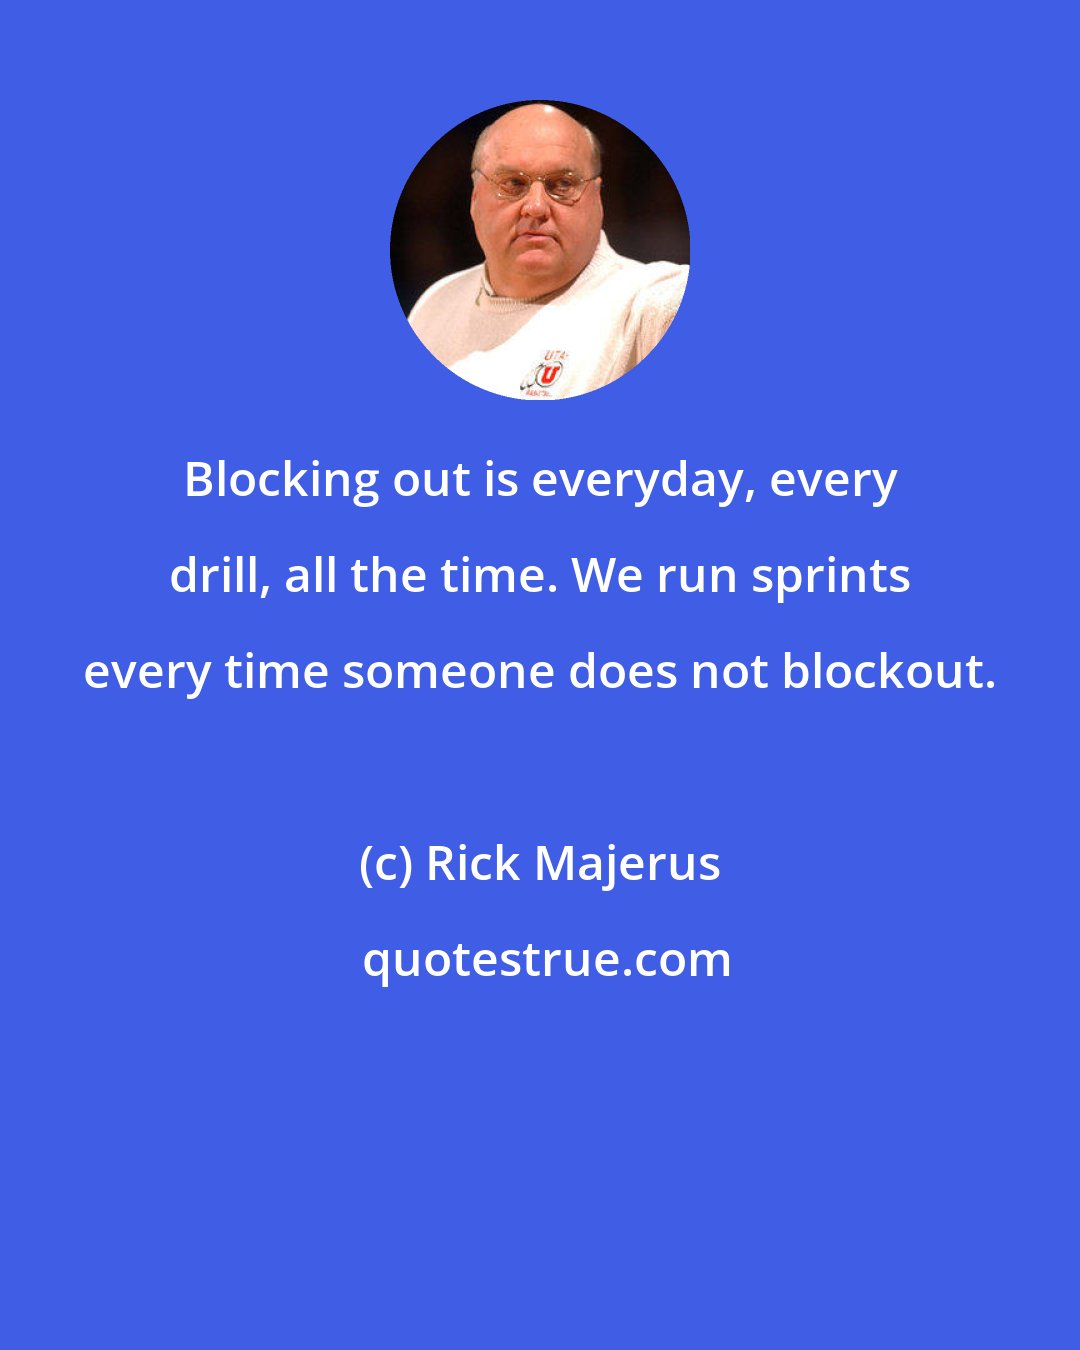 Rick Majerus: Blocking out is everyday, every drill, all the time. We run sprints every time someone does not blockout.